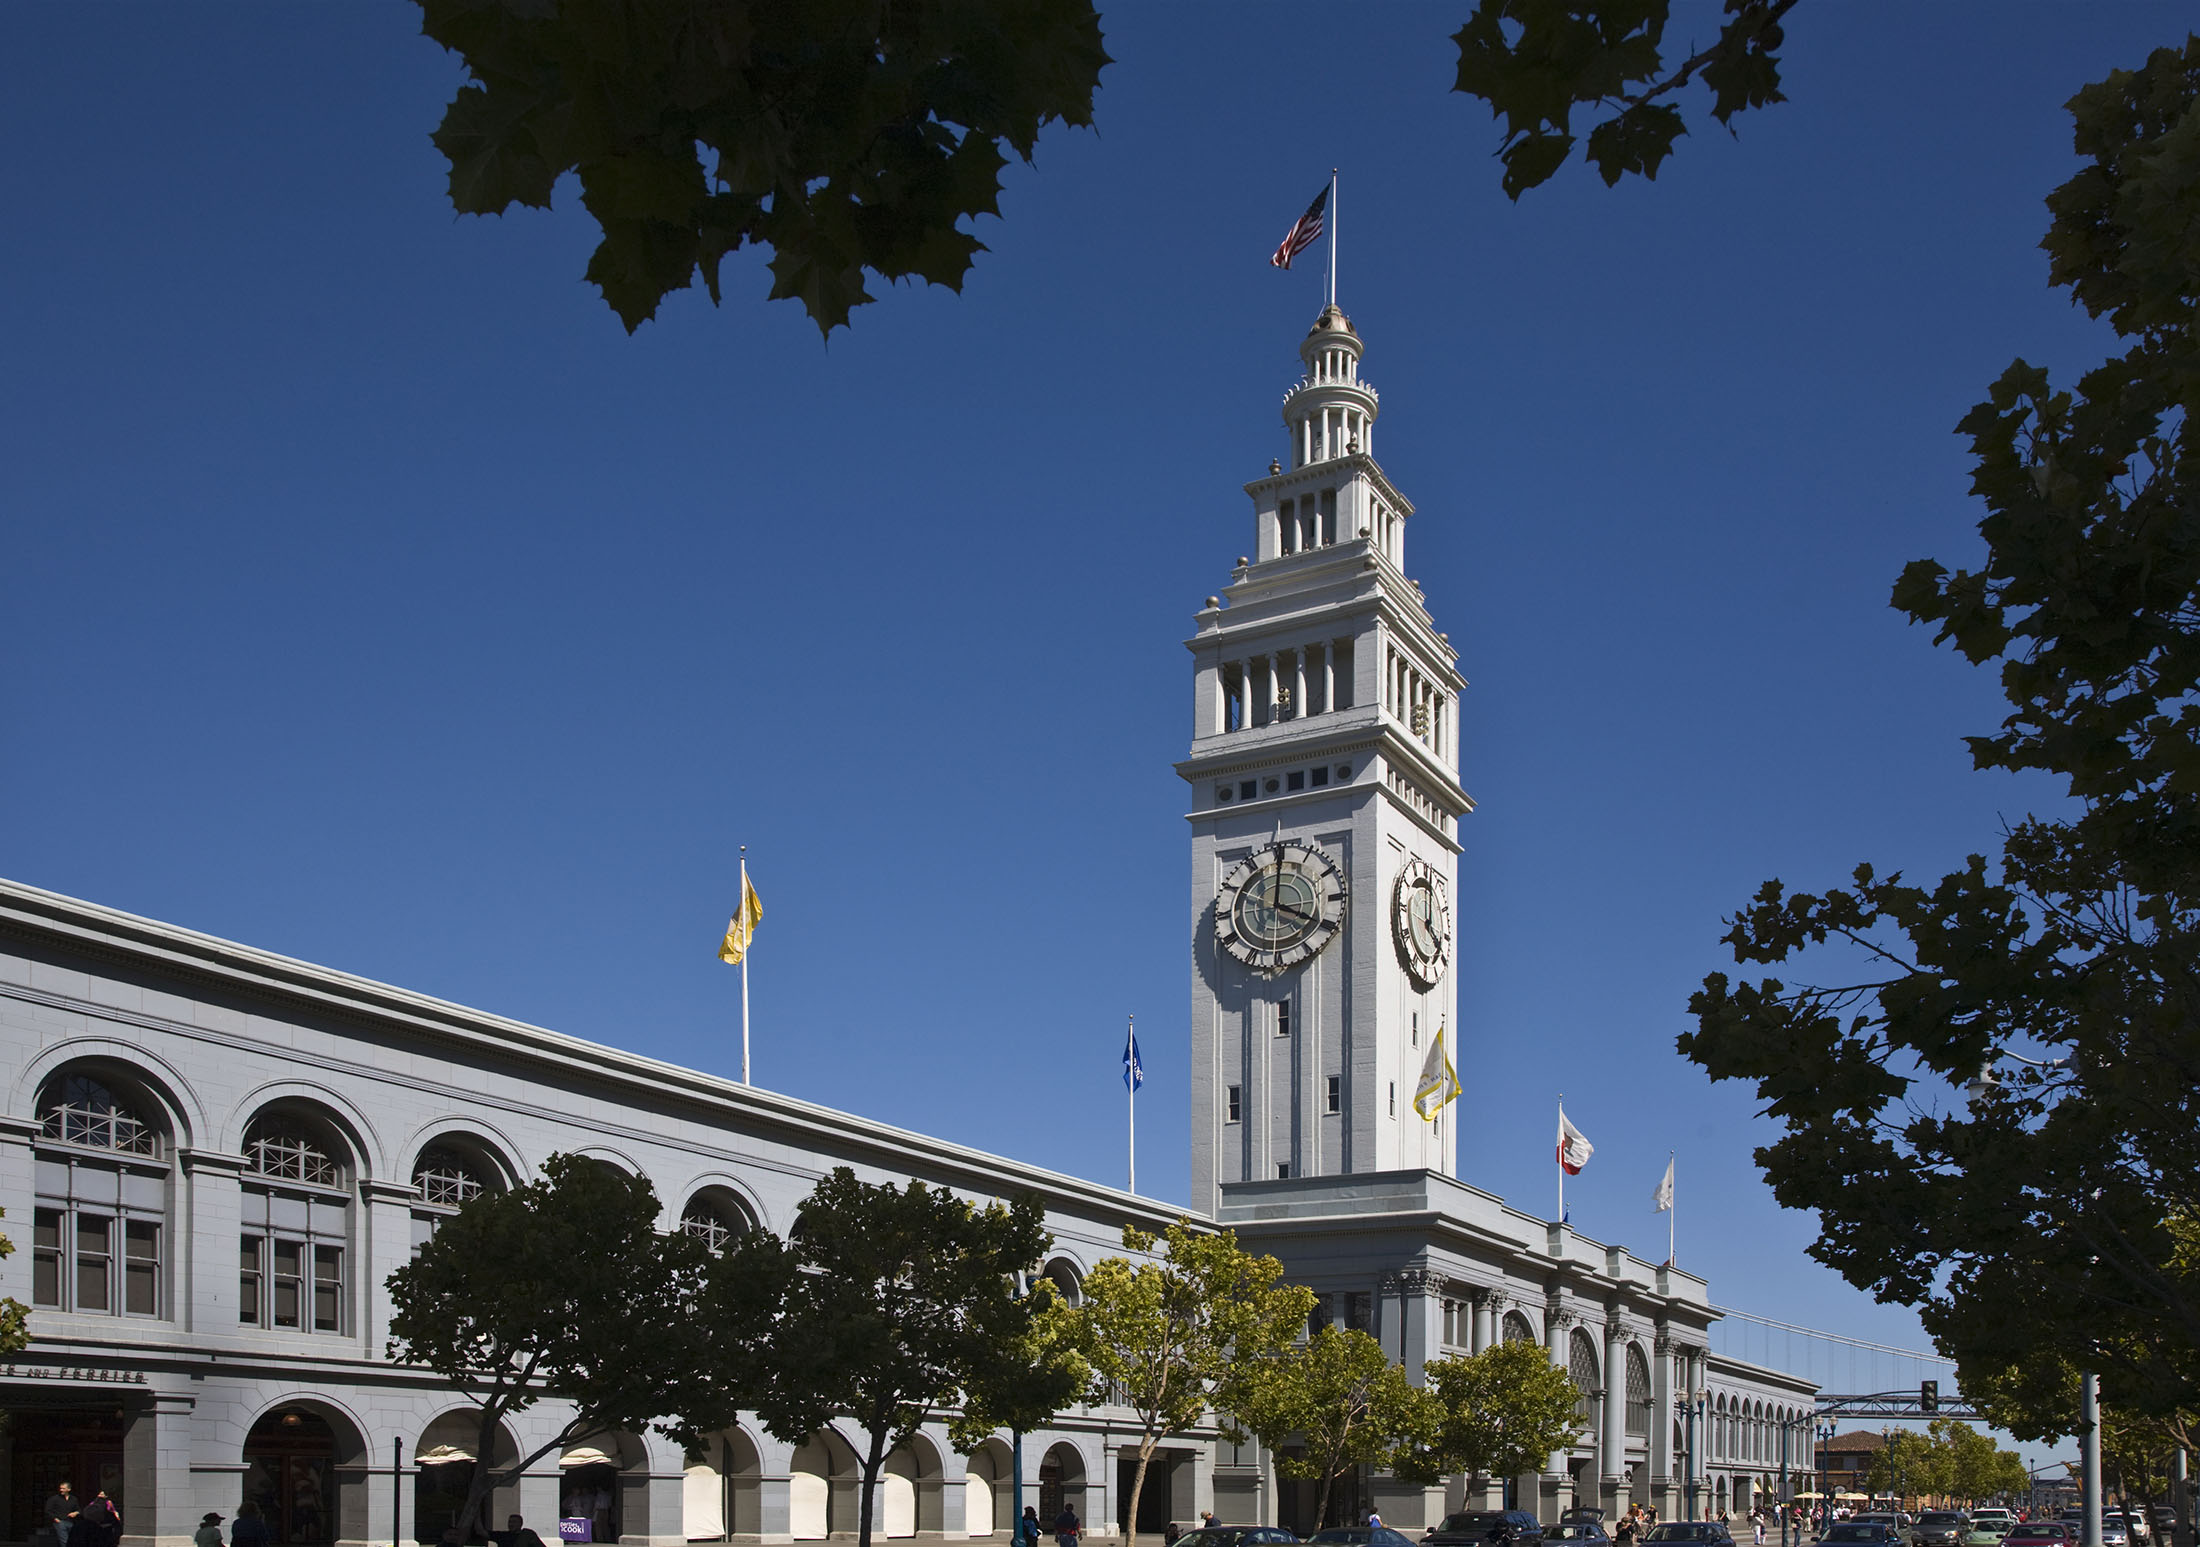 The Ferry Building in San Francisco, California.
